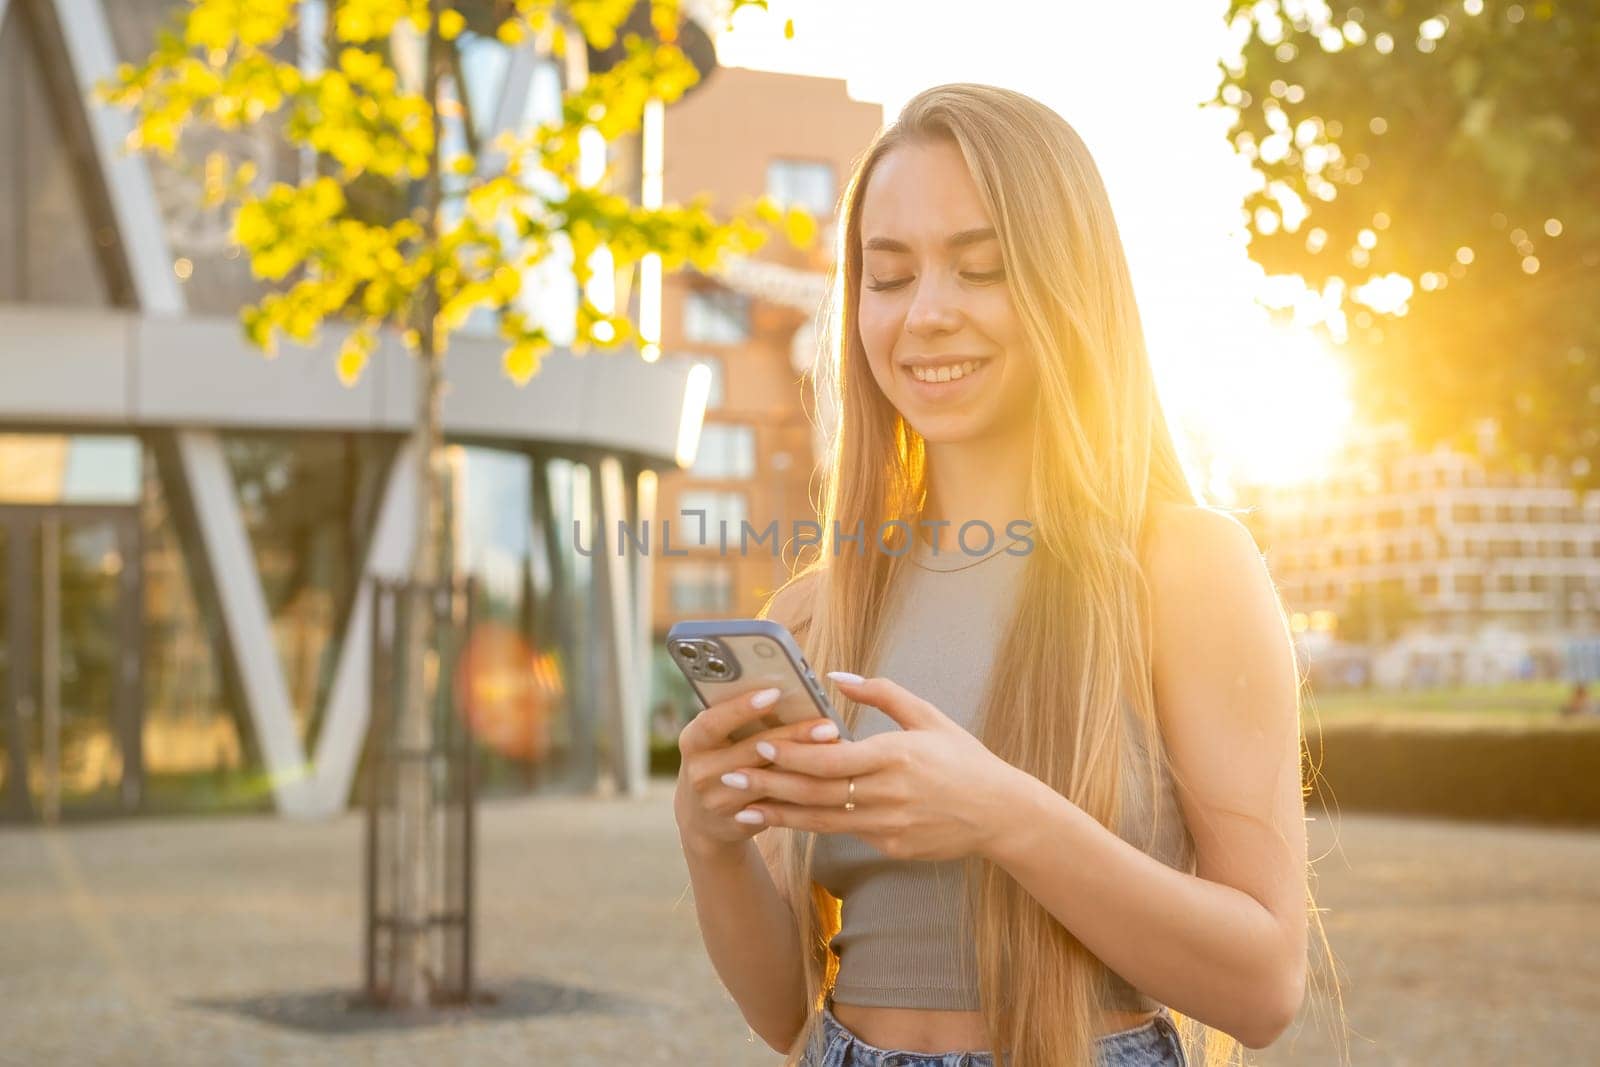 Happy young woman with long blonde hair holds a mobile phone standing in the street.